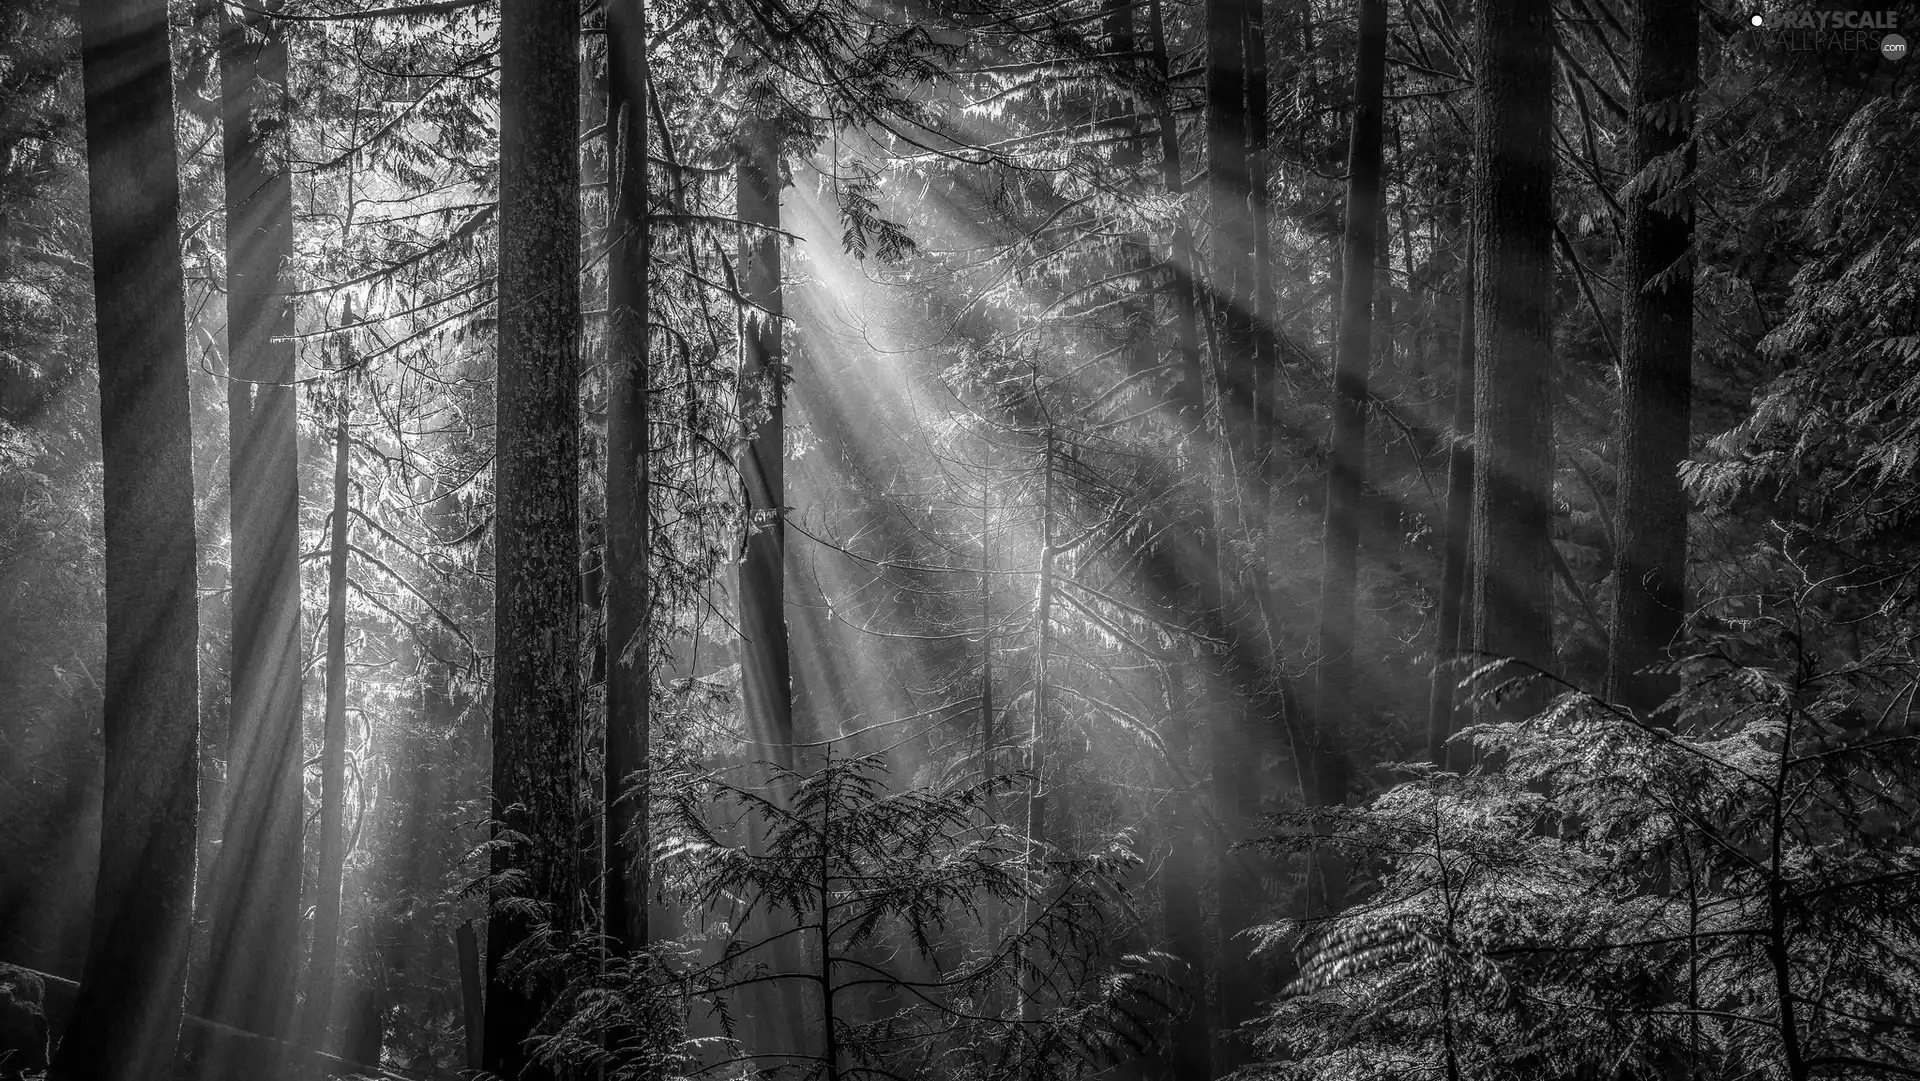 viewes, Stems, light breaking through sky, trees, forest